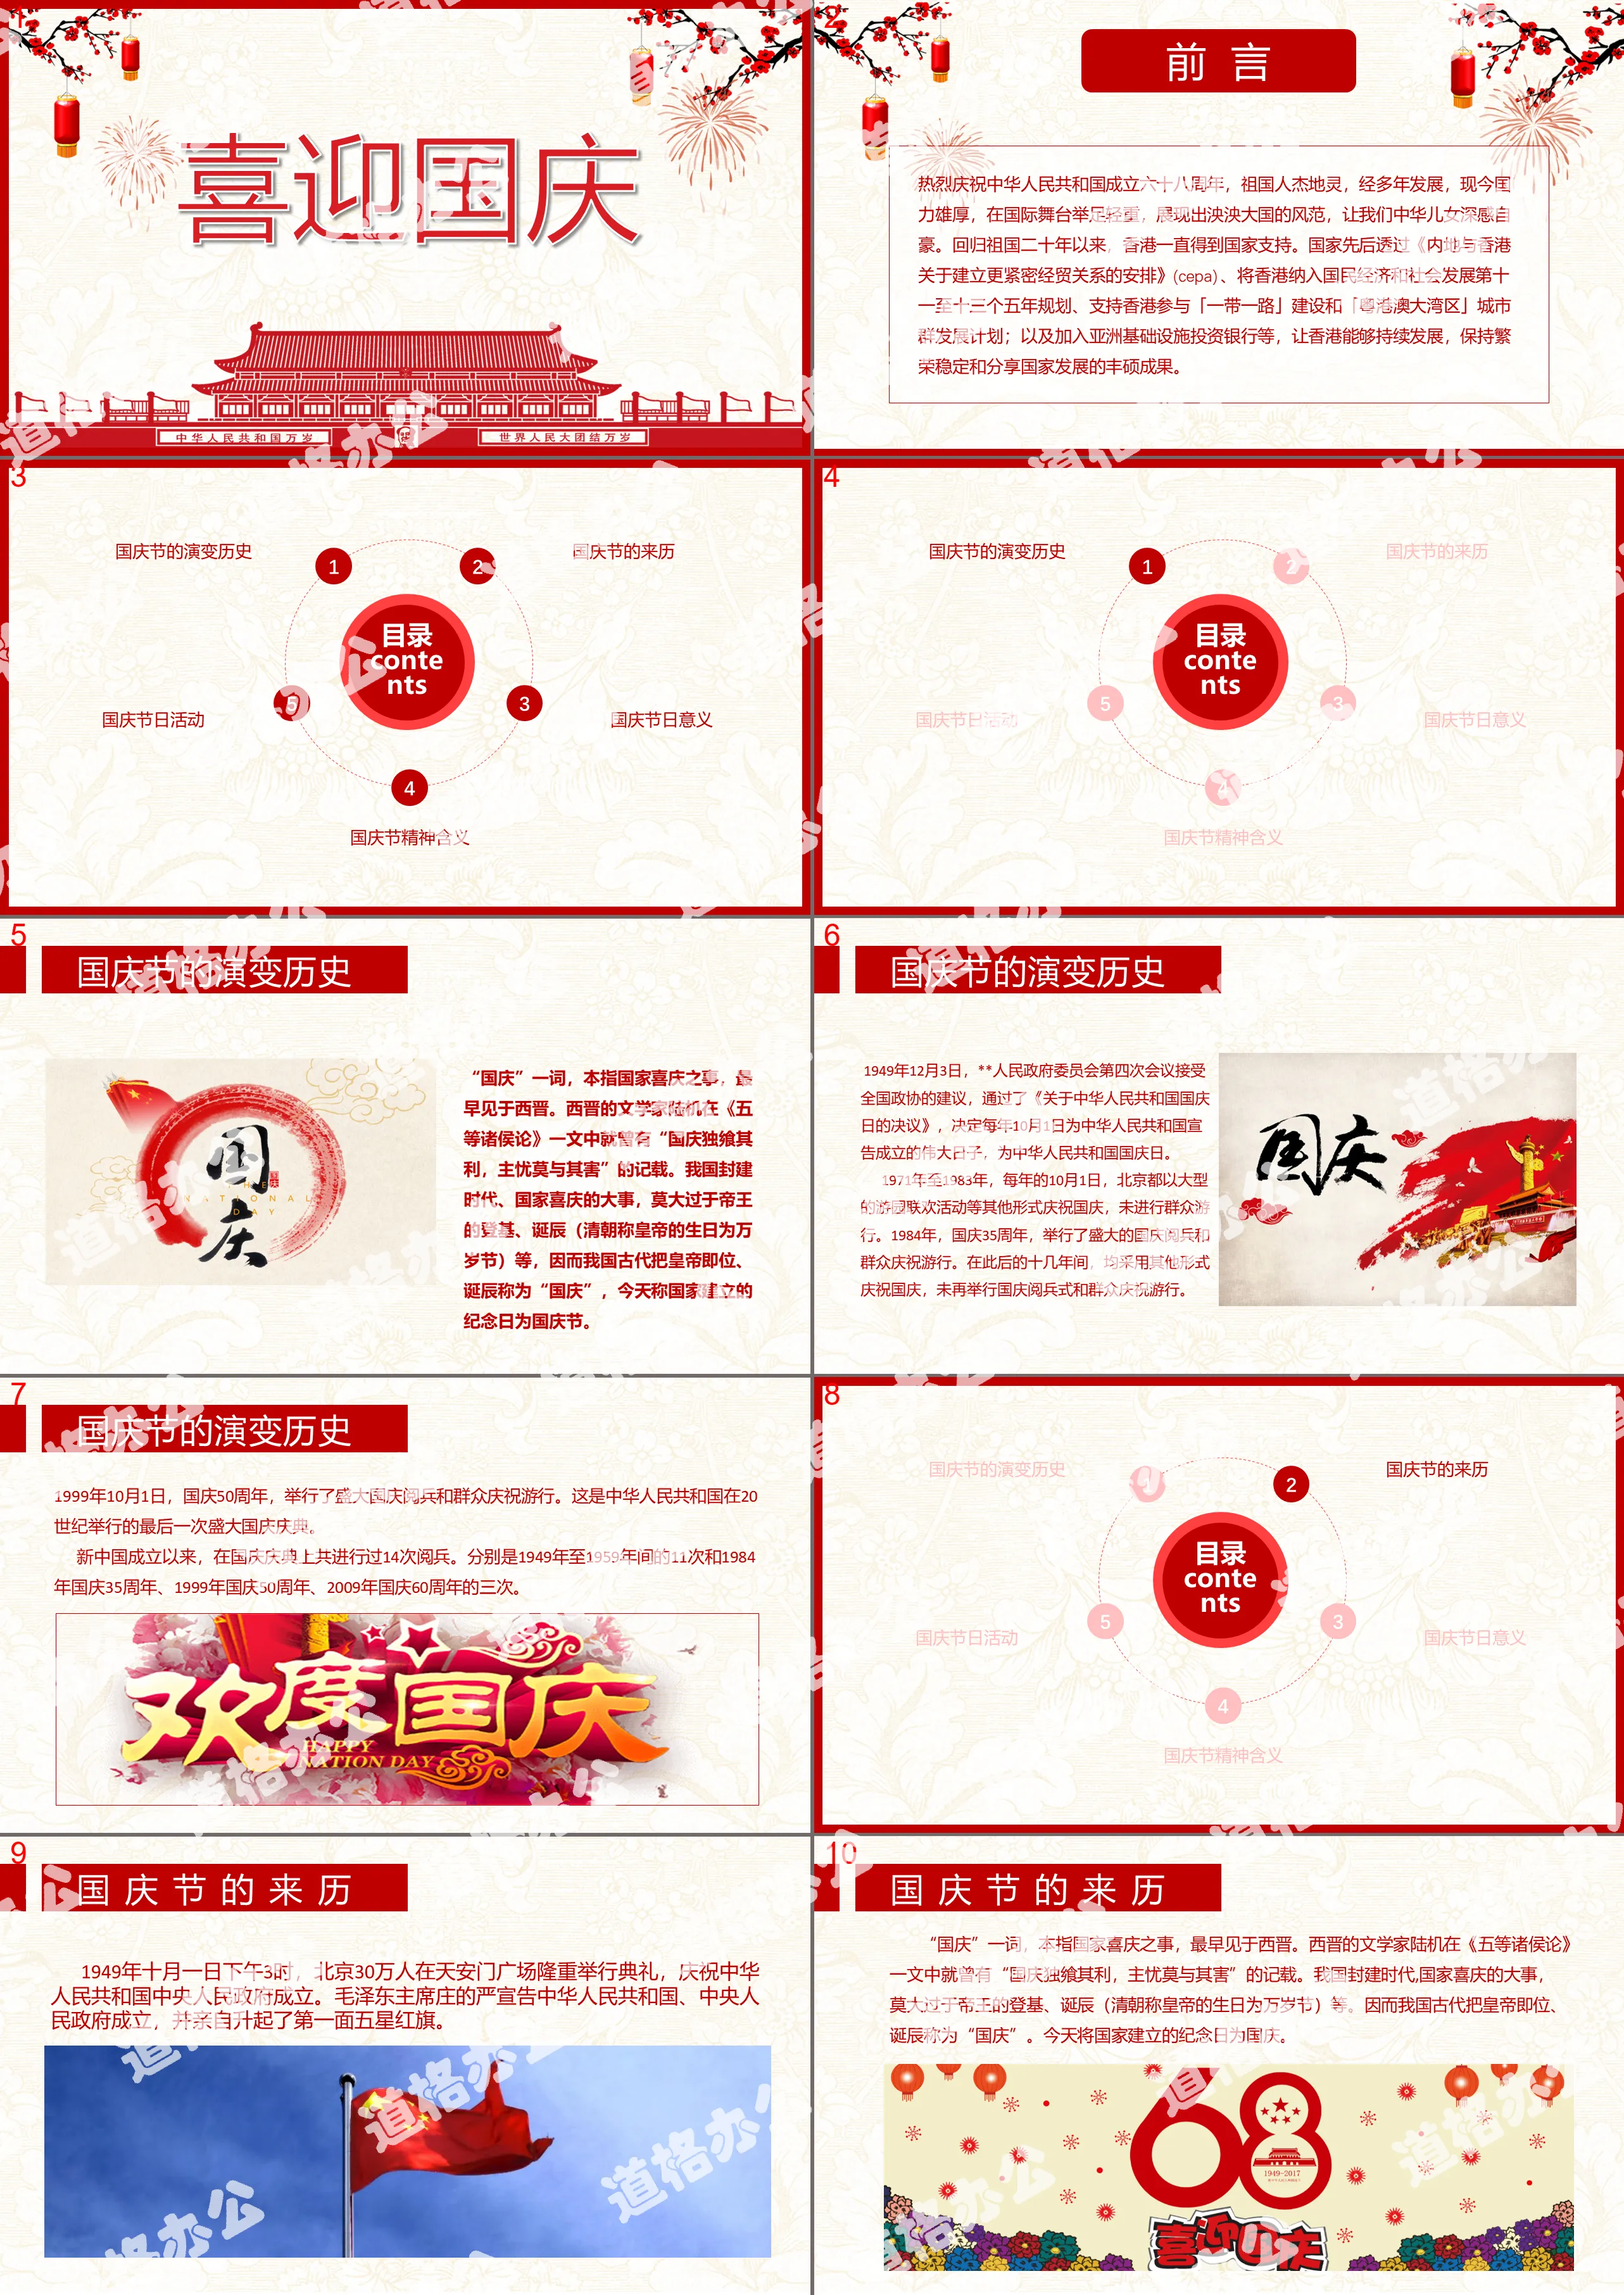 Celebrating the National Day PPT template with Tiananmen Square background